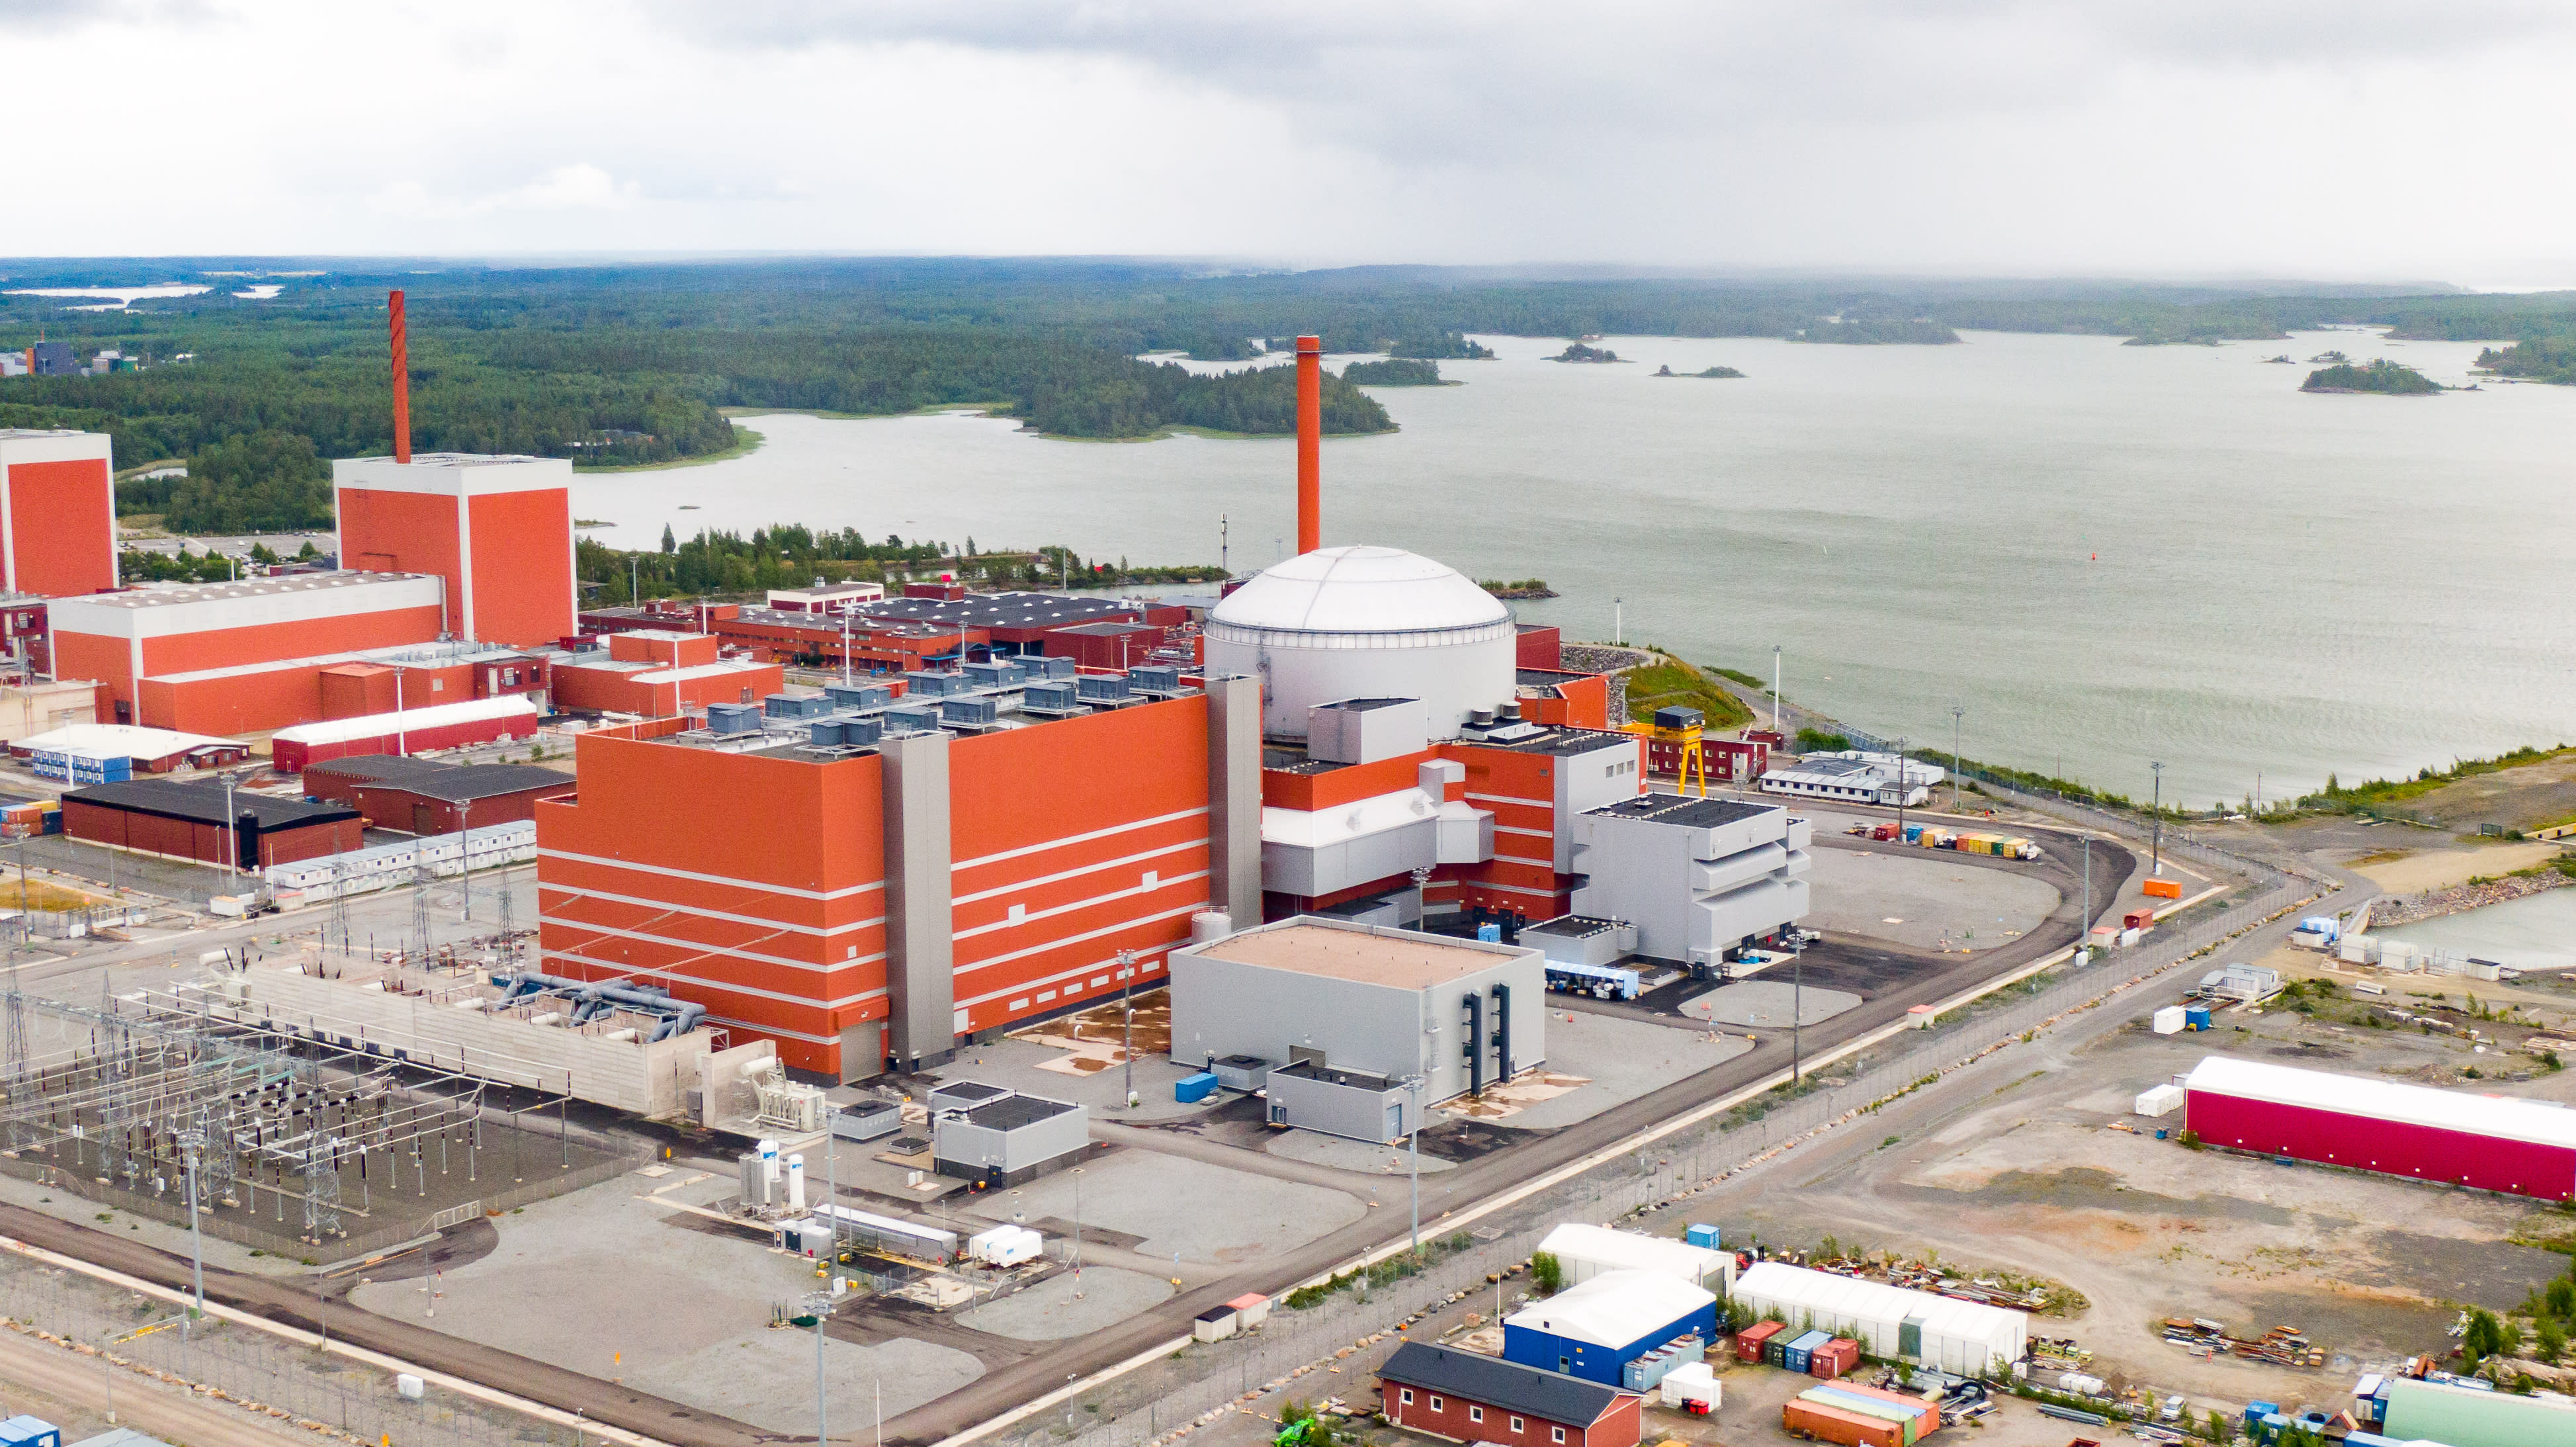 Finland’s new reactor is being tested at full power